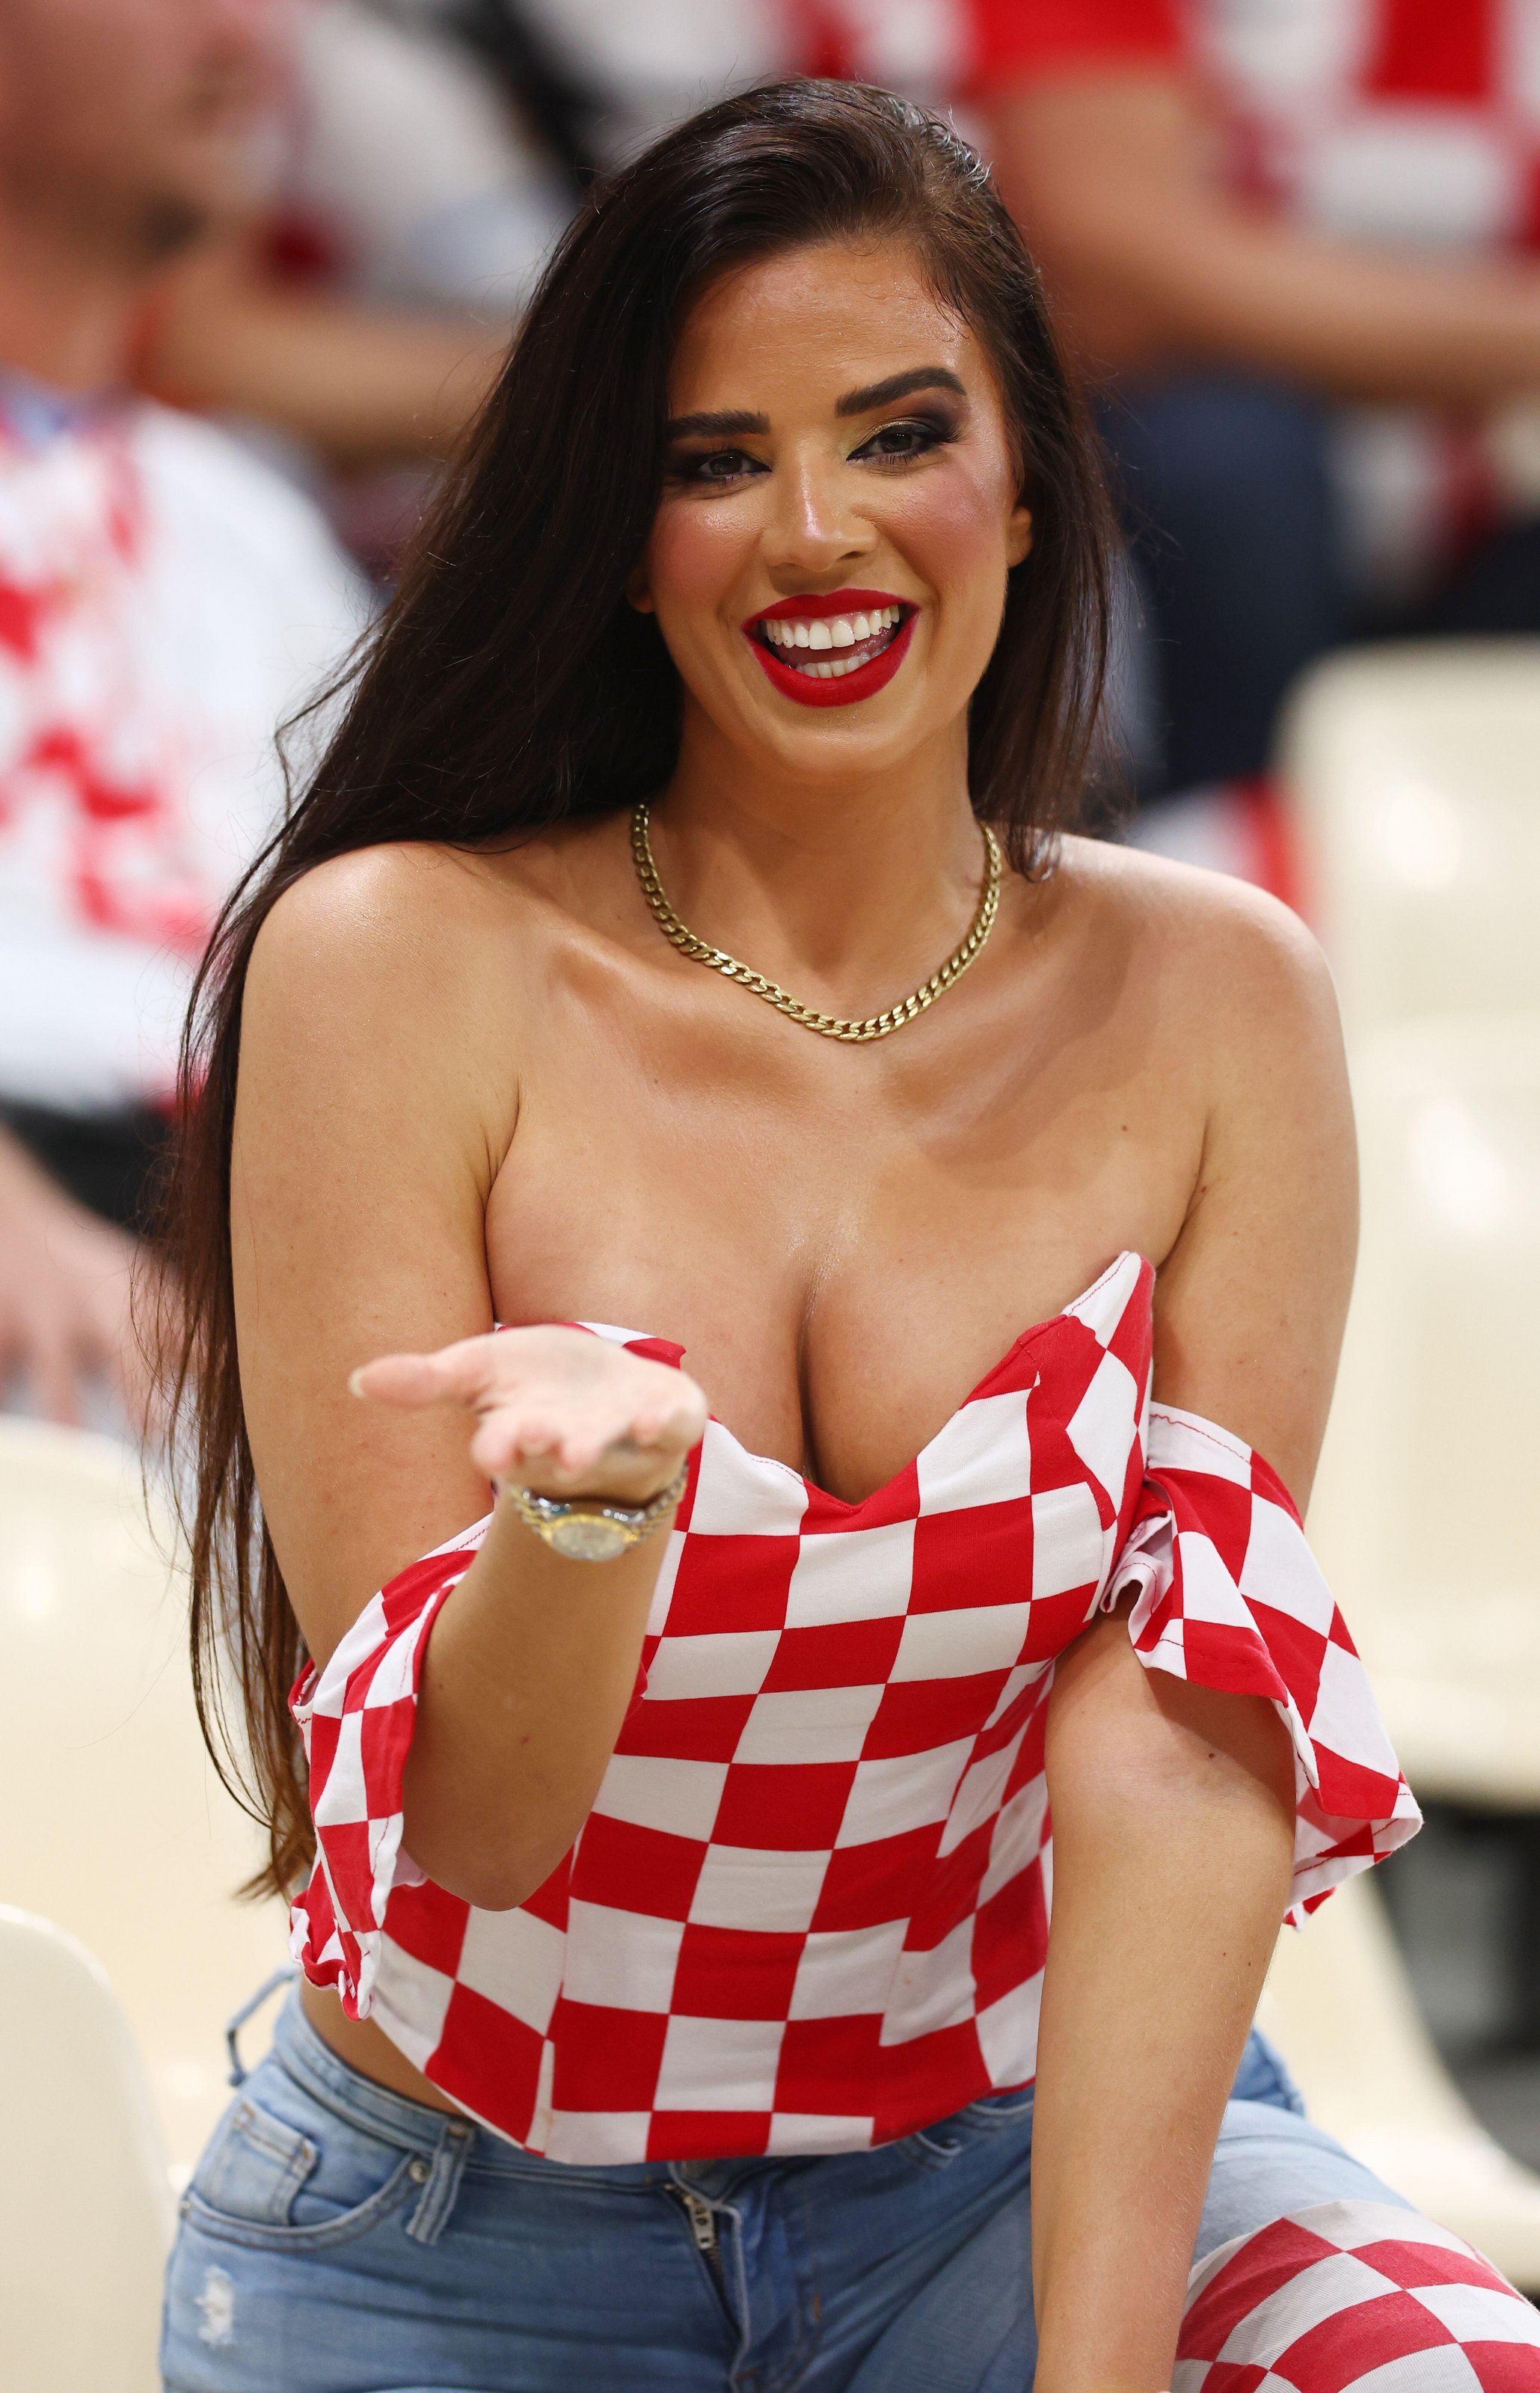 , World Cup’s ‘hottest fan’ Ivana Knoll claims football stars slid into her DMs during tournament in Qatar